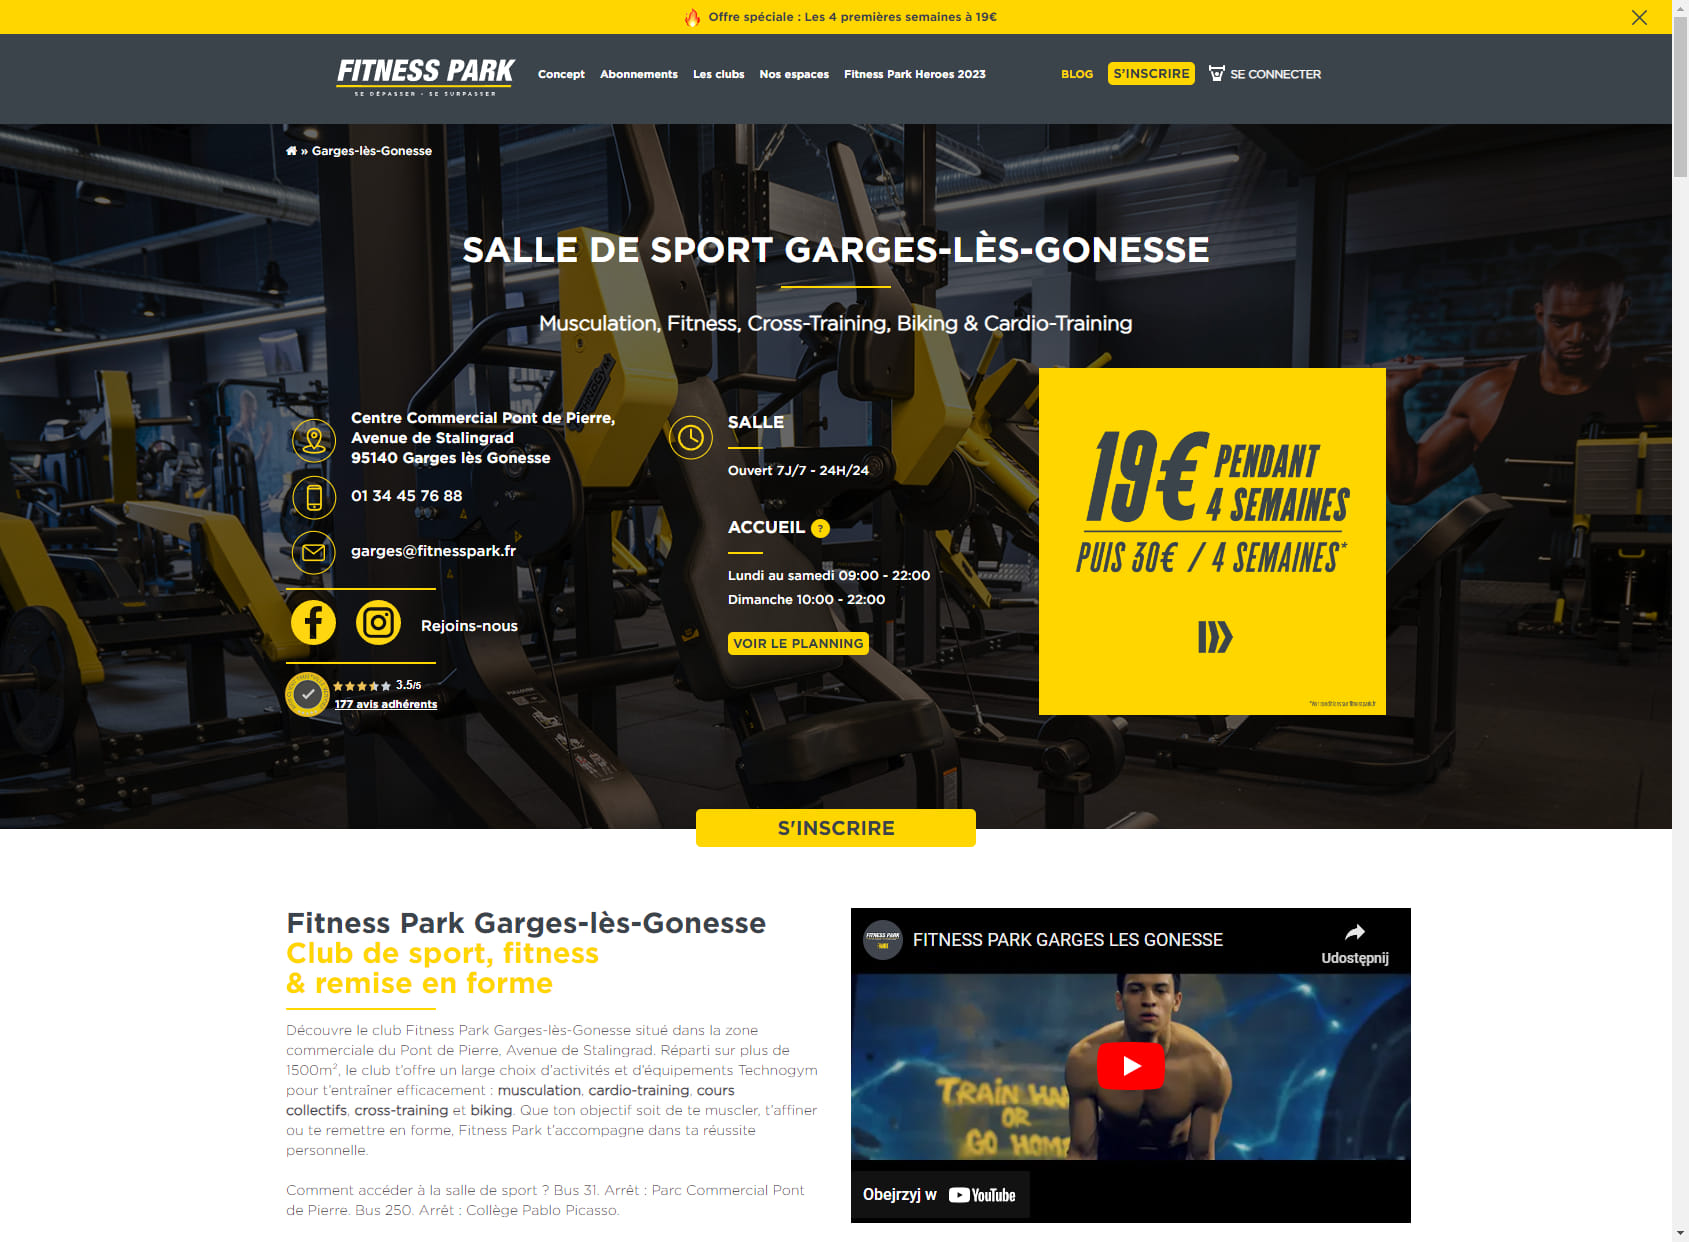 Fitness Park in Garges